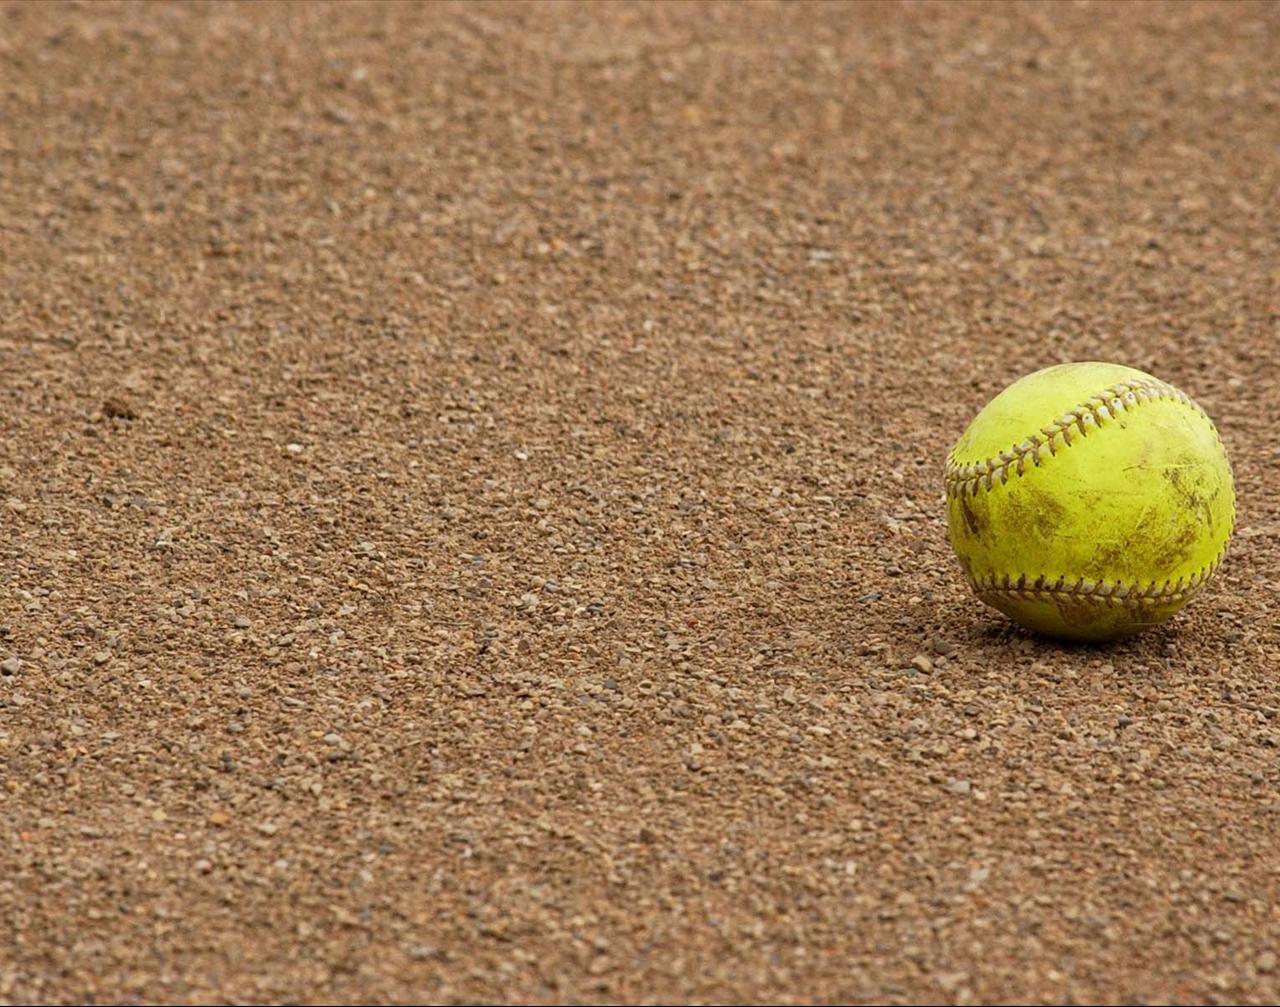 Softball Free PPT Background for your PowerPoint